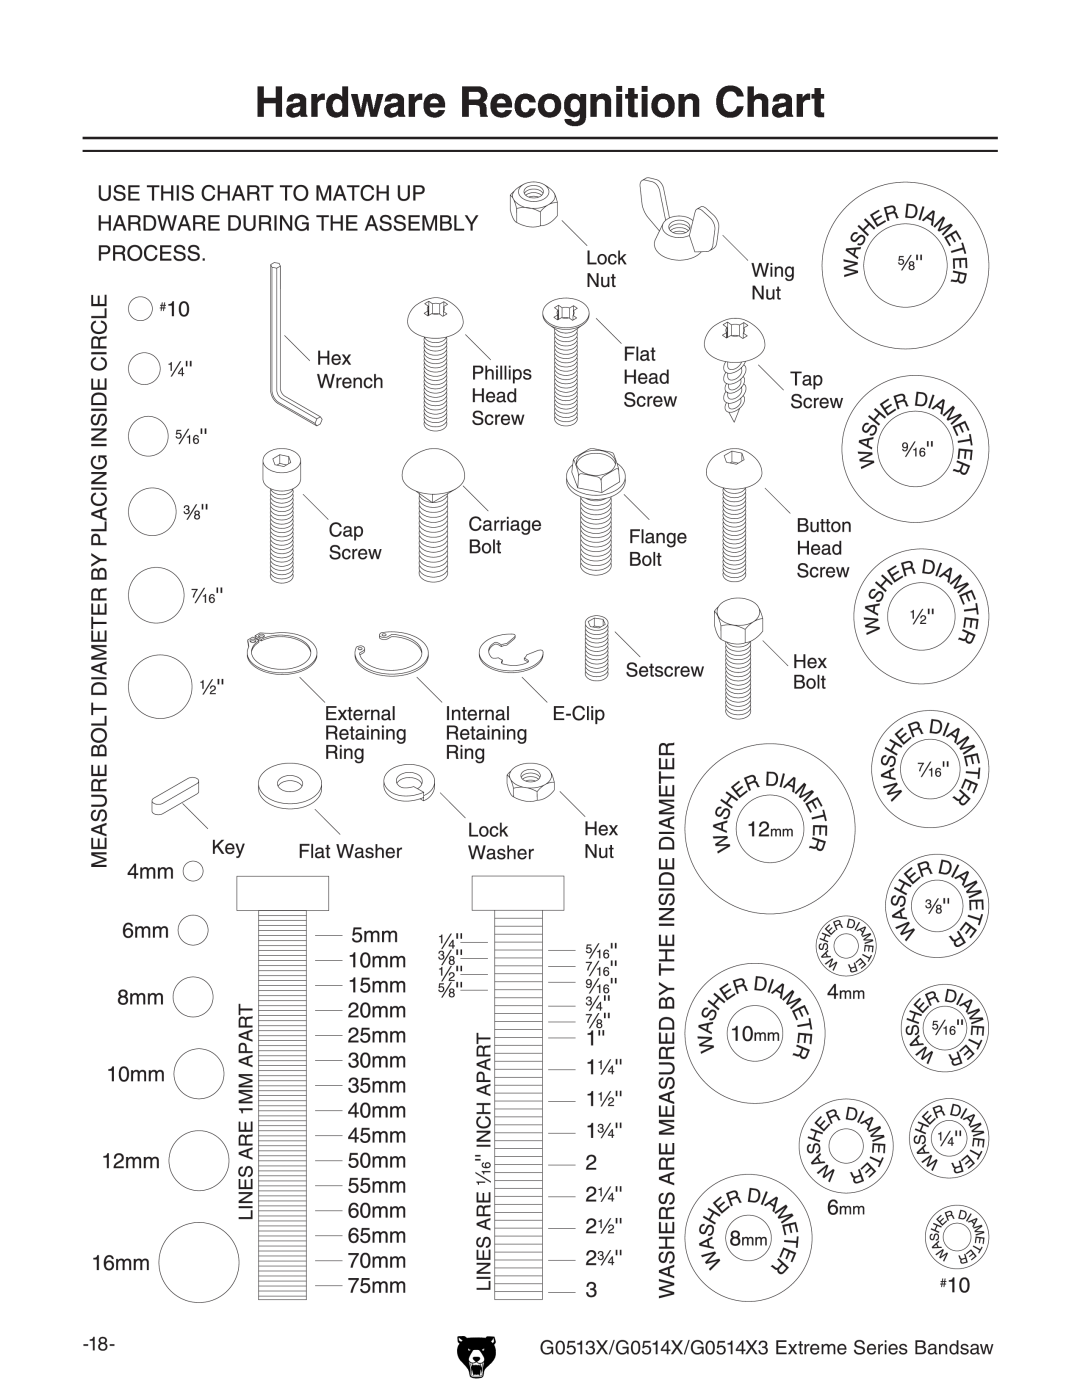 Grizzly owner manual Hardware Recognition Chart, G0513X/G0514X/G0514X3 Extreme Series Bandsaw 